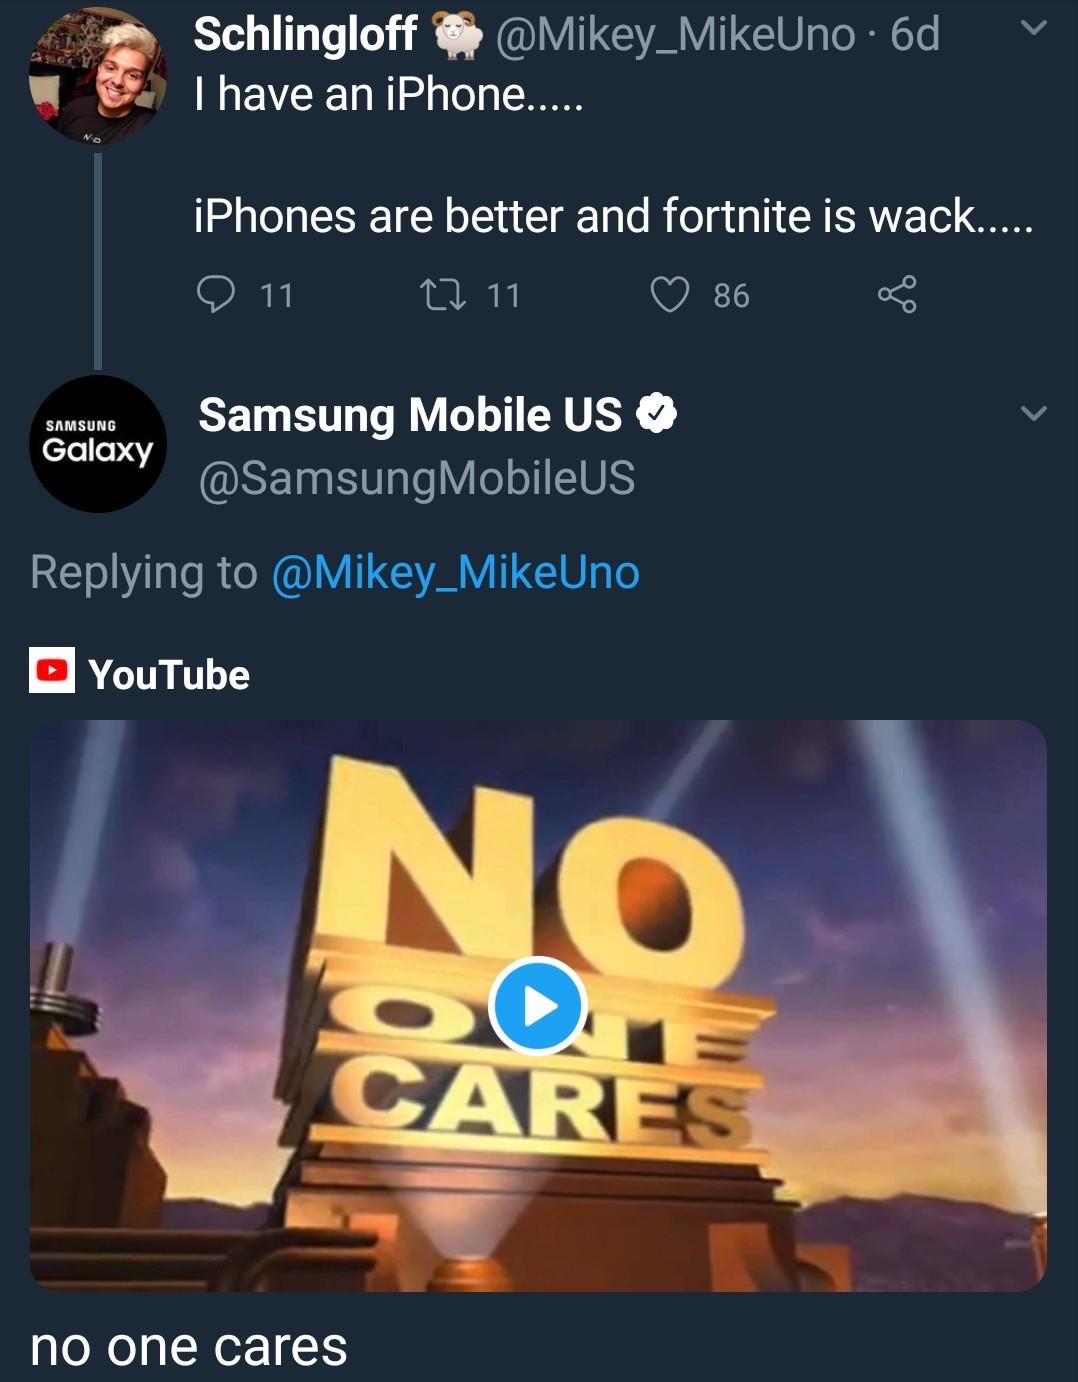 no one cares - Schlingloff 6d I have an iPhone..... v iPhones are better and fortnite is wack..... 2 11 27 11 86 8 Samsung Galaxy Samsung Mobile Us MobileUS YouTube Cares no one cares